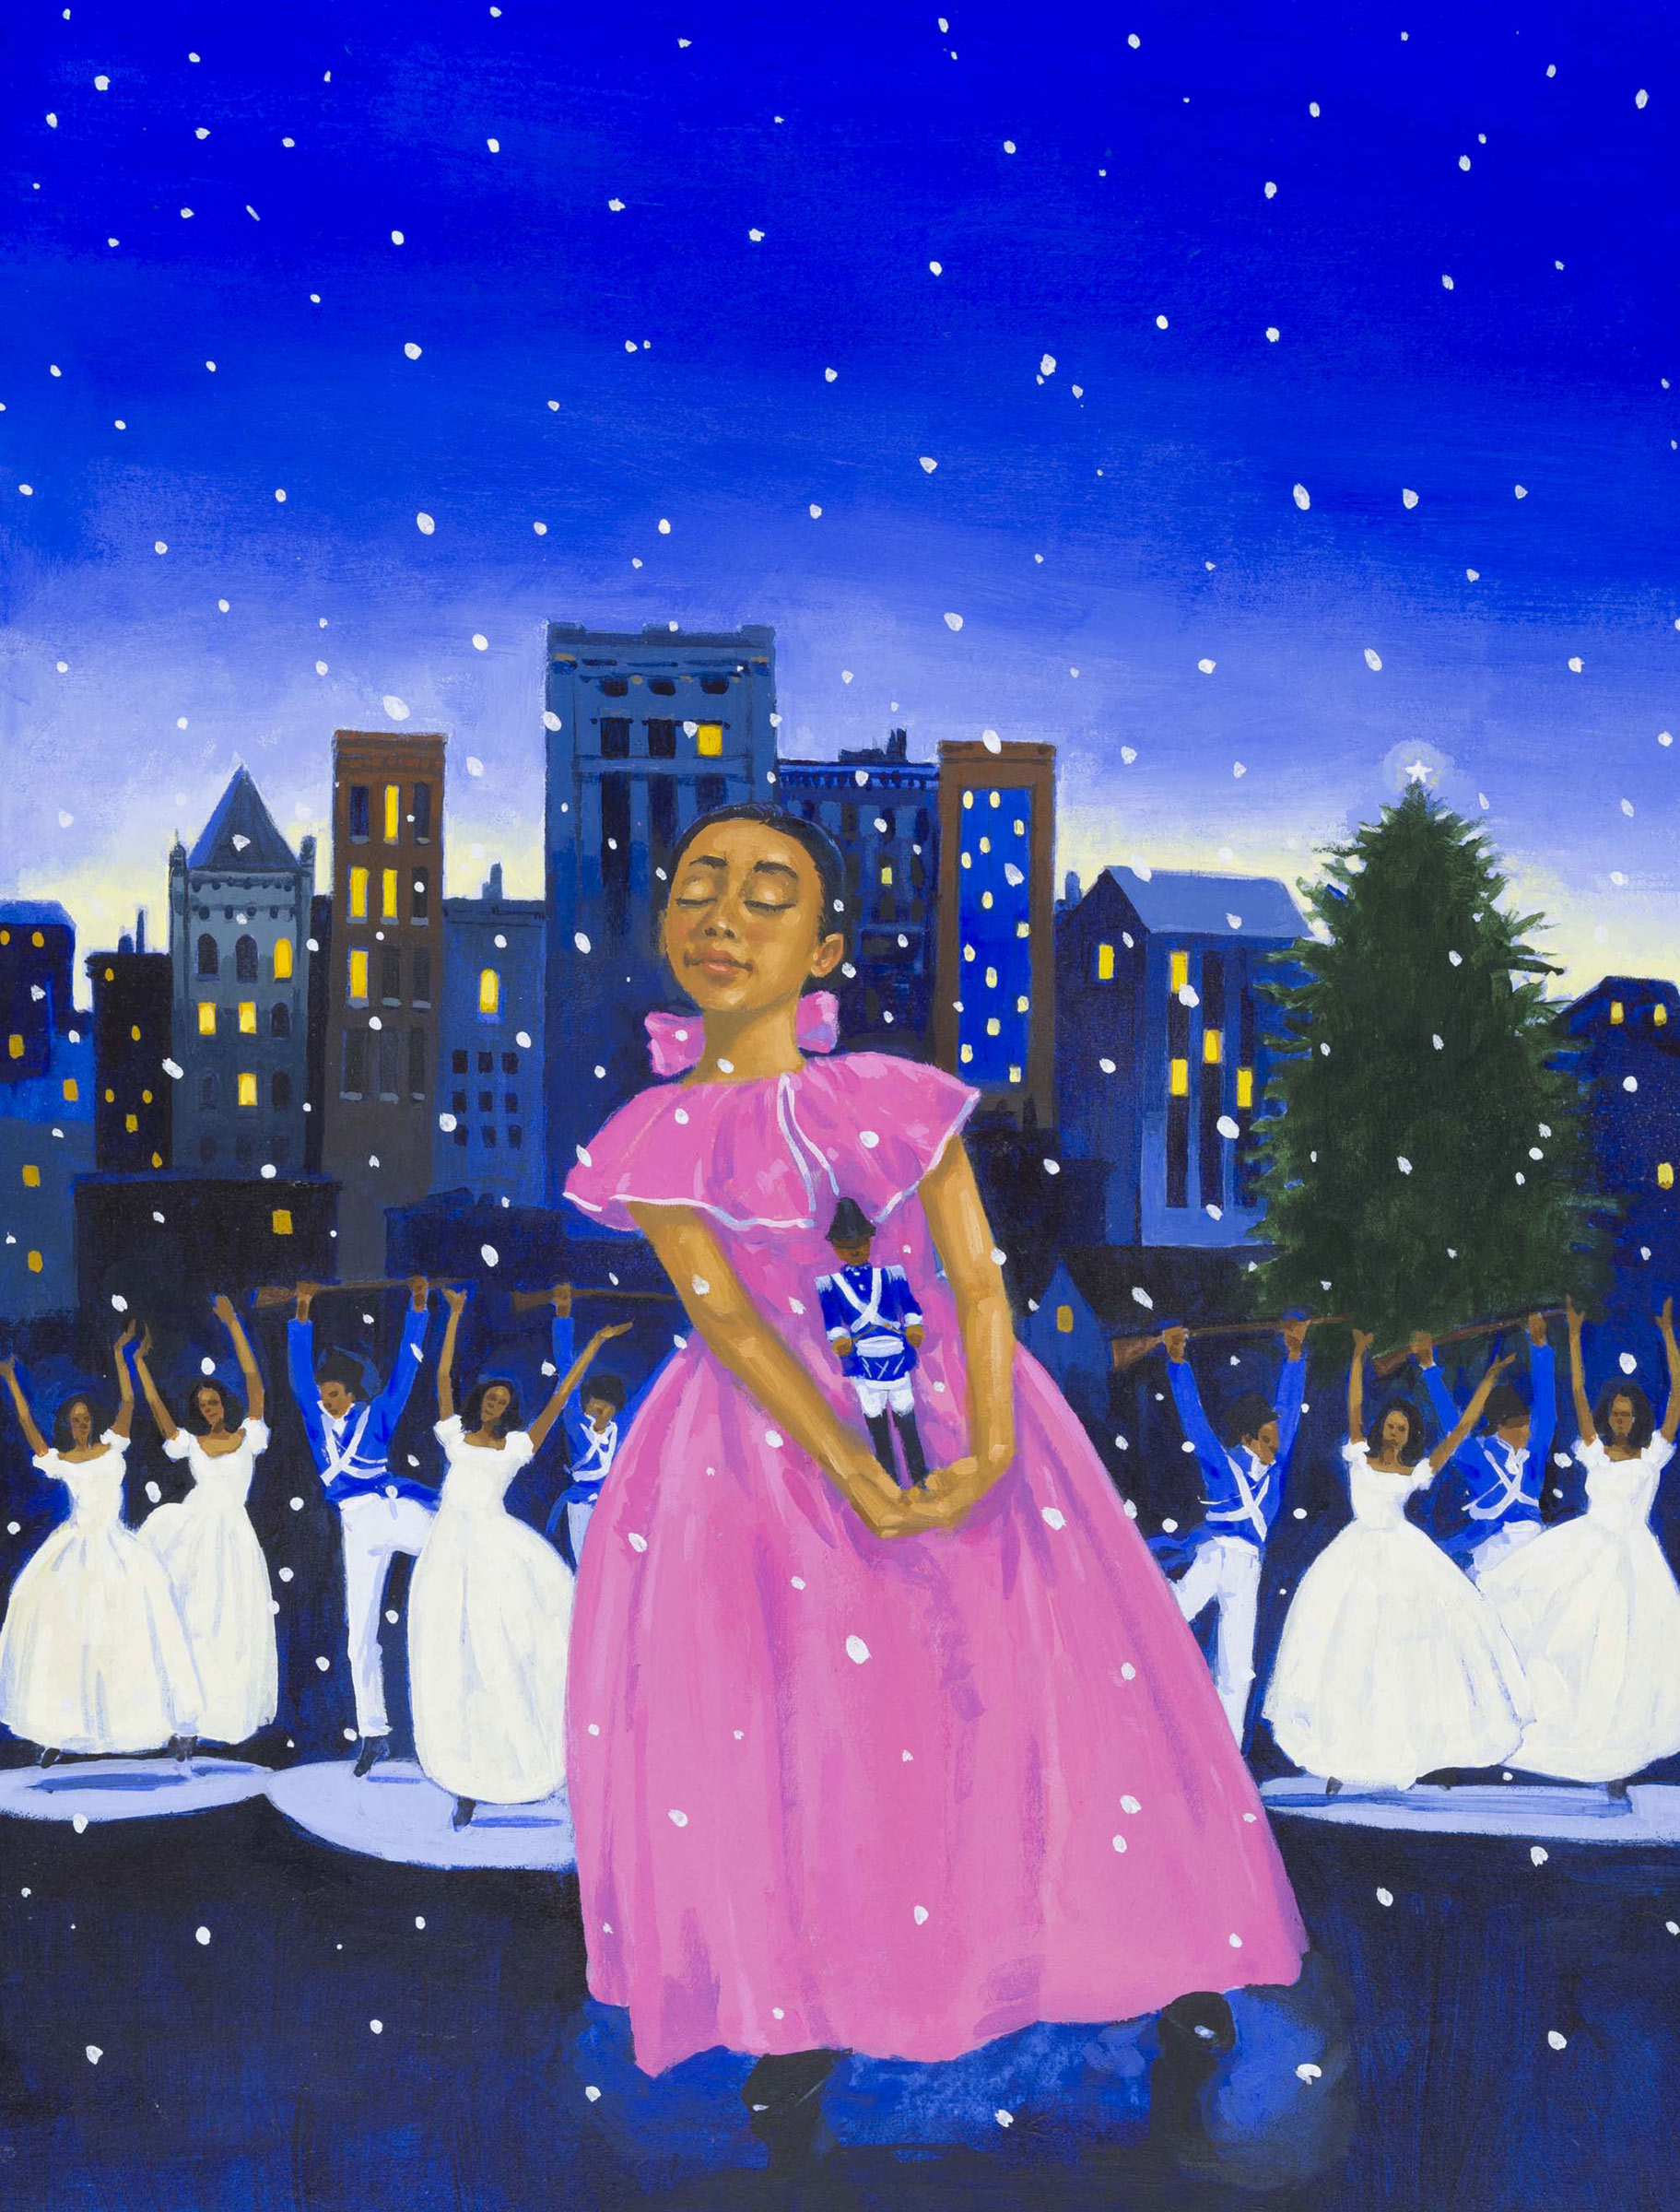 James Ransome, b. 1961, Cover illustration for The Nutcracker in Harlem, 2017, Mixed medium, 15 1/2 x 15 inches, Collection of the artist